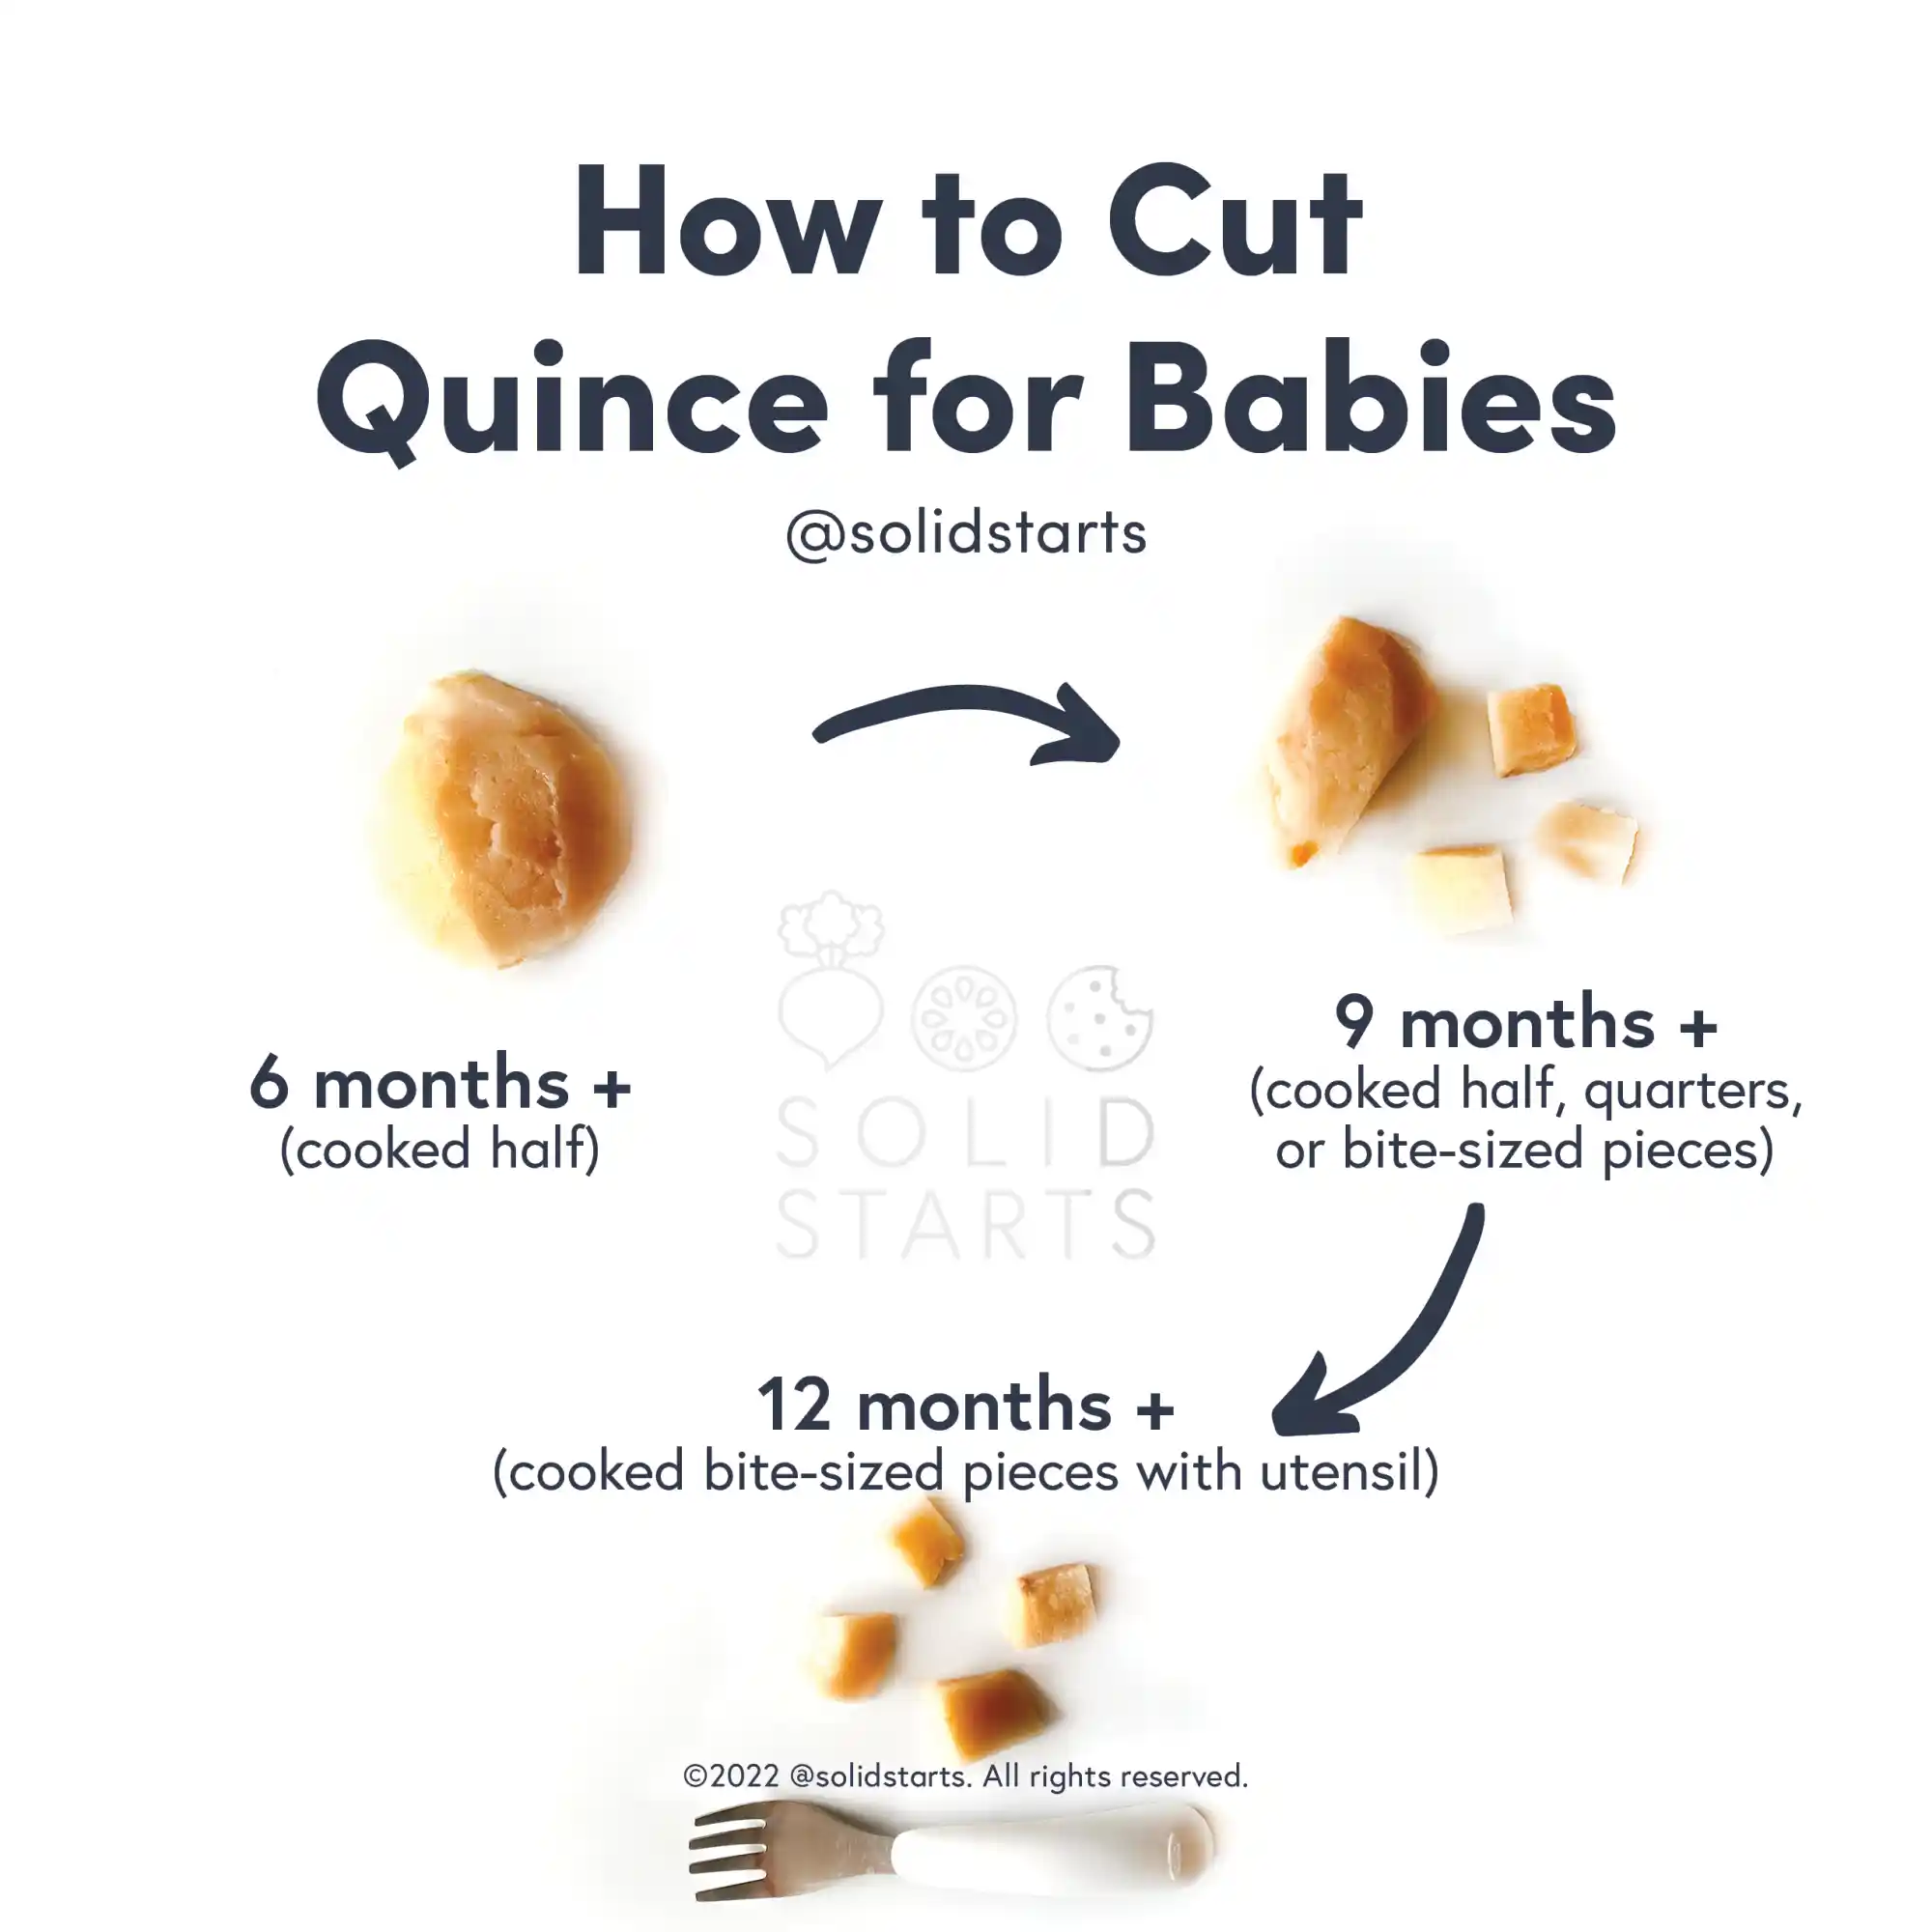 a Solid Starts infographic with the header How to Cut Quince for Babies: cooked halves for 6 months+, cooked halves, quarters, or bite-size pieces for 9 months+, cooked bite-size pieces with utensil for 12 months+